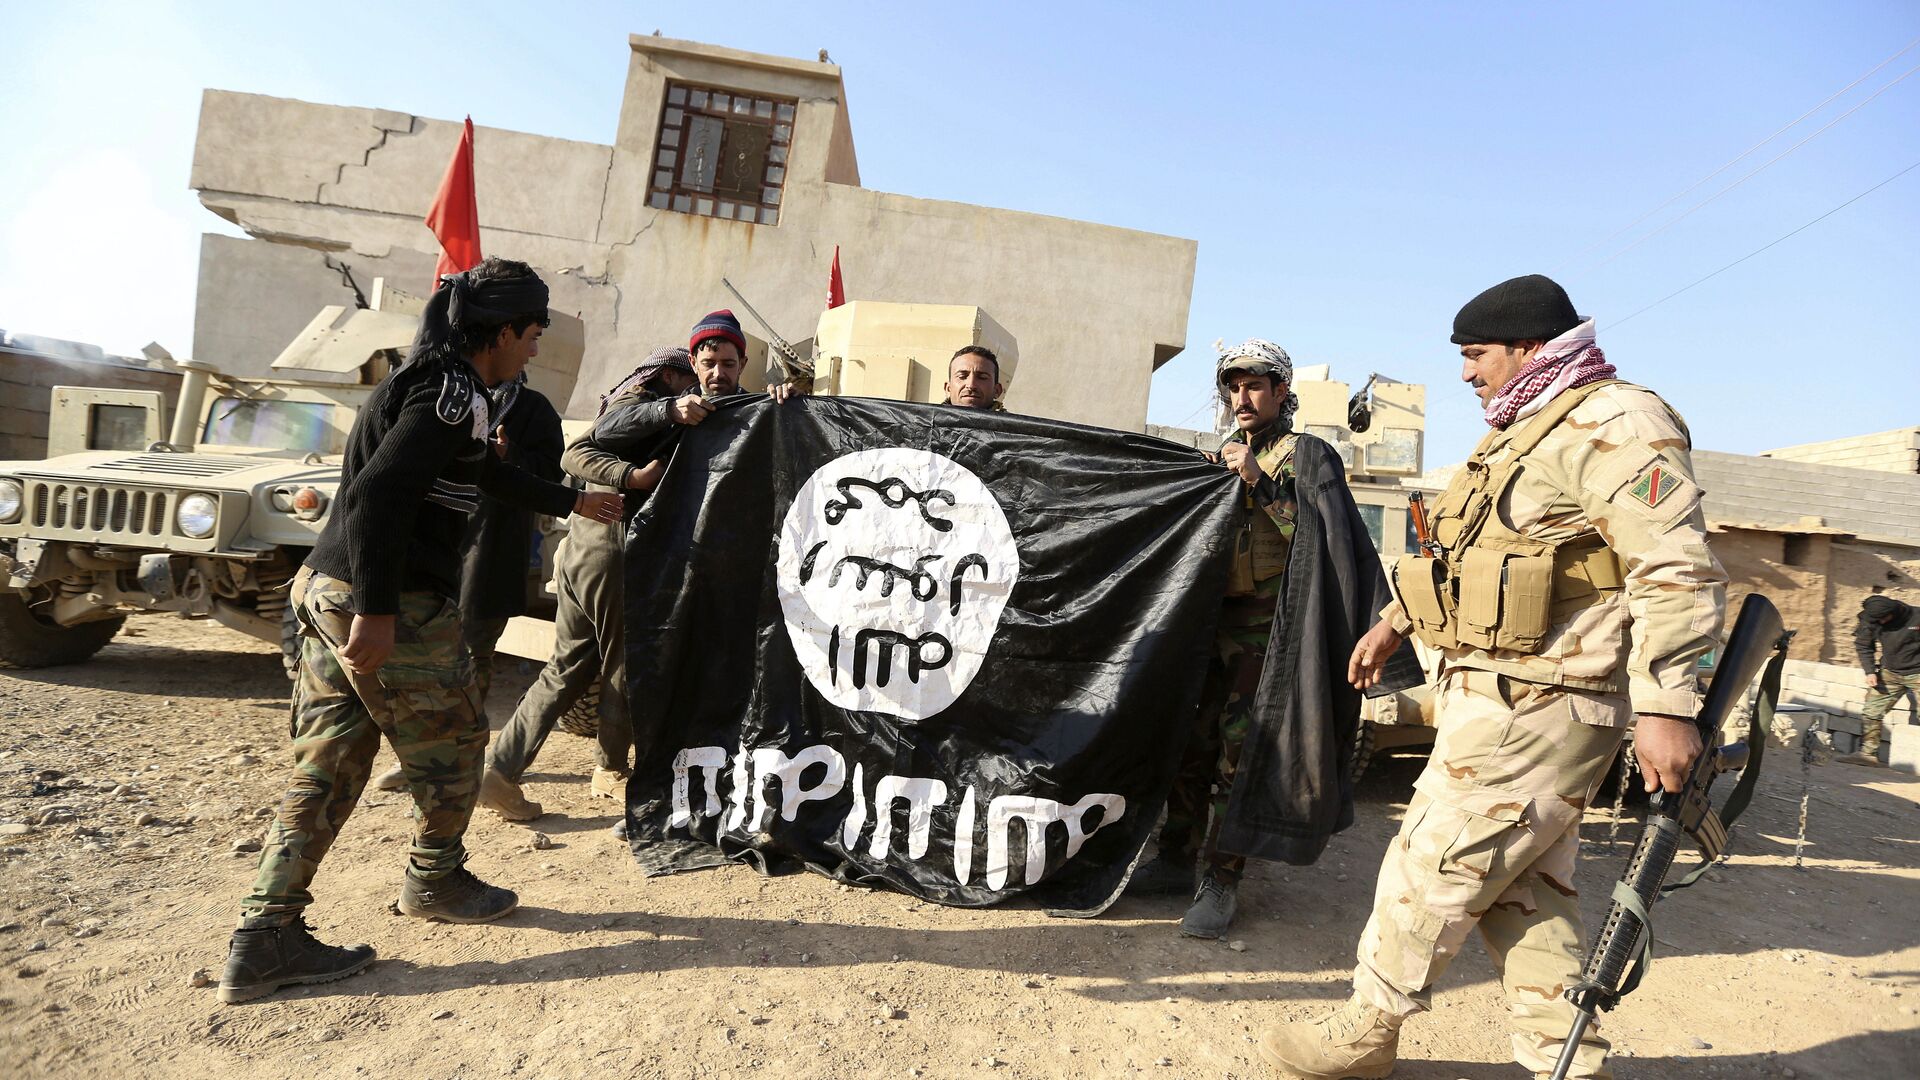  Iraqi Army soldiers celebrate as they hold a flag of the Islamic State group they captured during a military operation to regain control of a village outside Mosul, Iraq (File) - Sputnik International, 1920, 03.10.2021